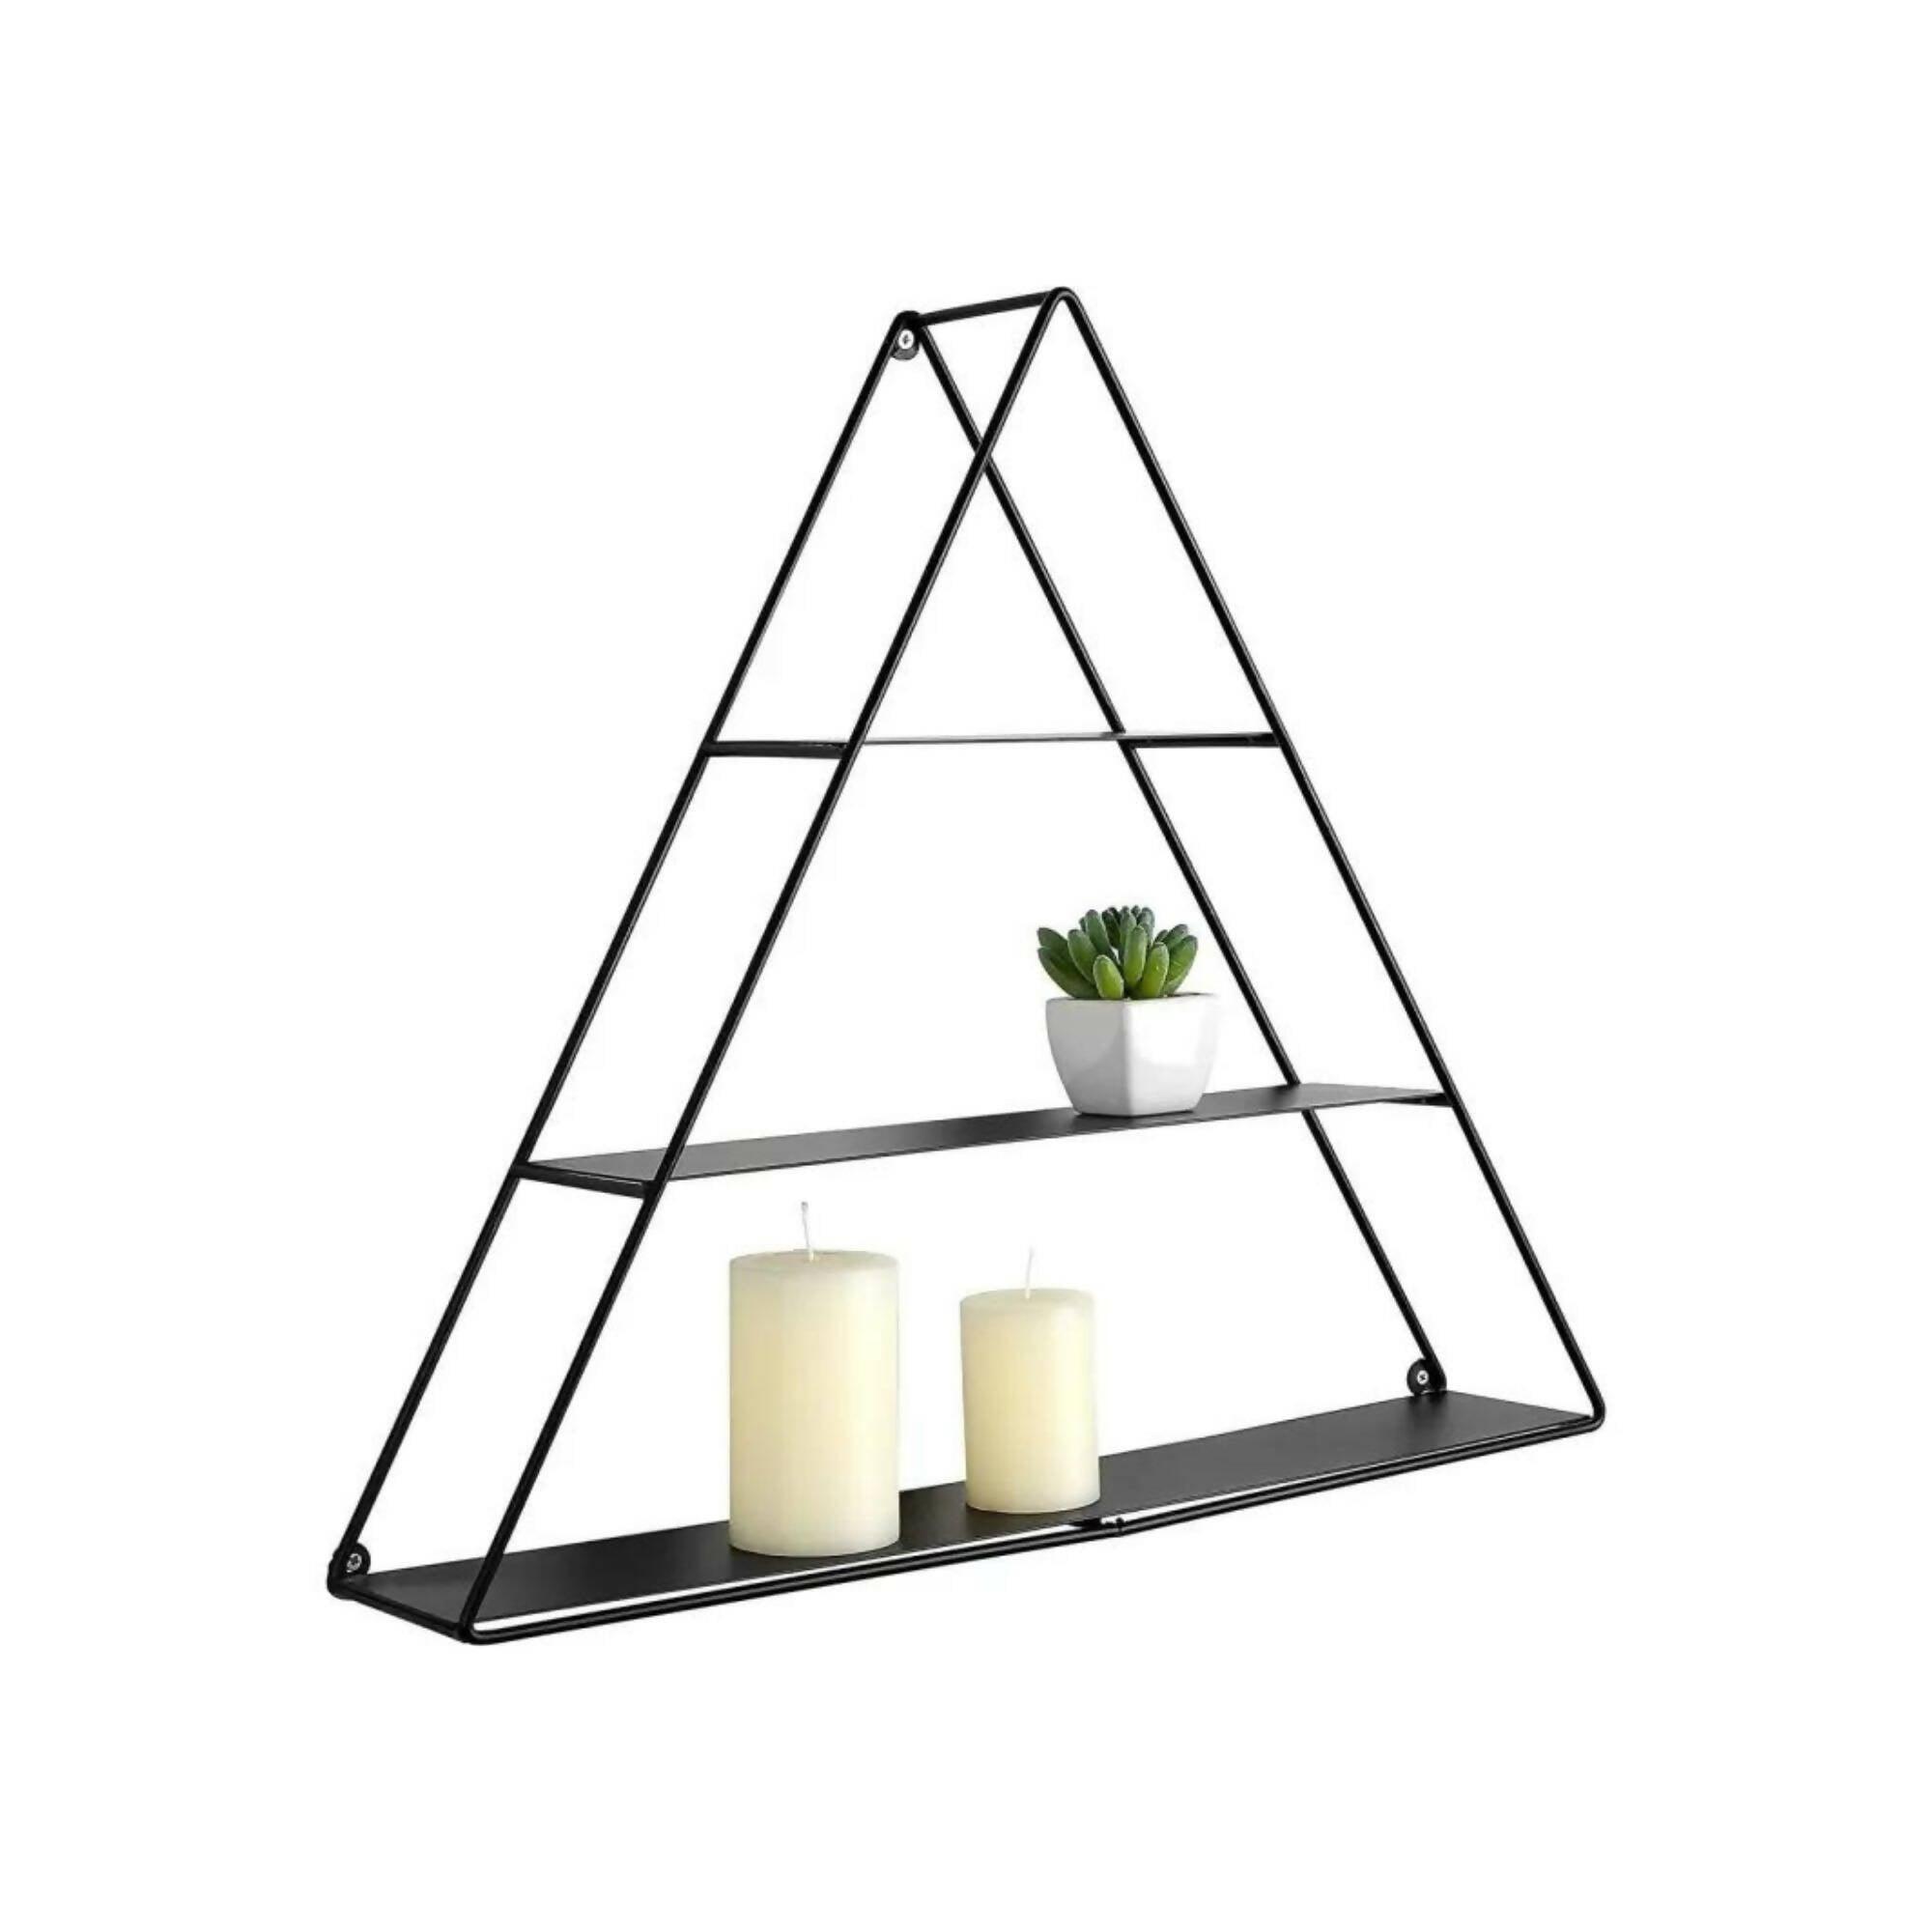 Triangular 3 Tier Decorative Display Shelf for Collectibles and Crystals - ValueBox